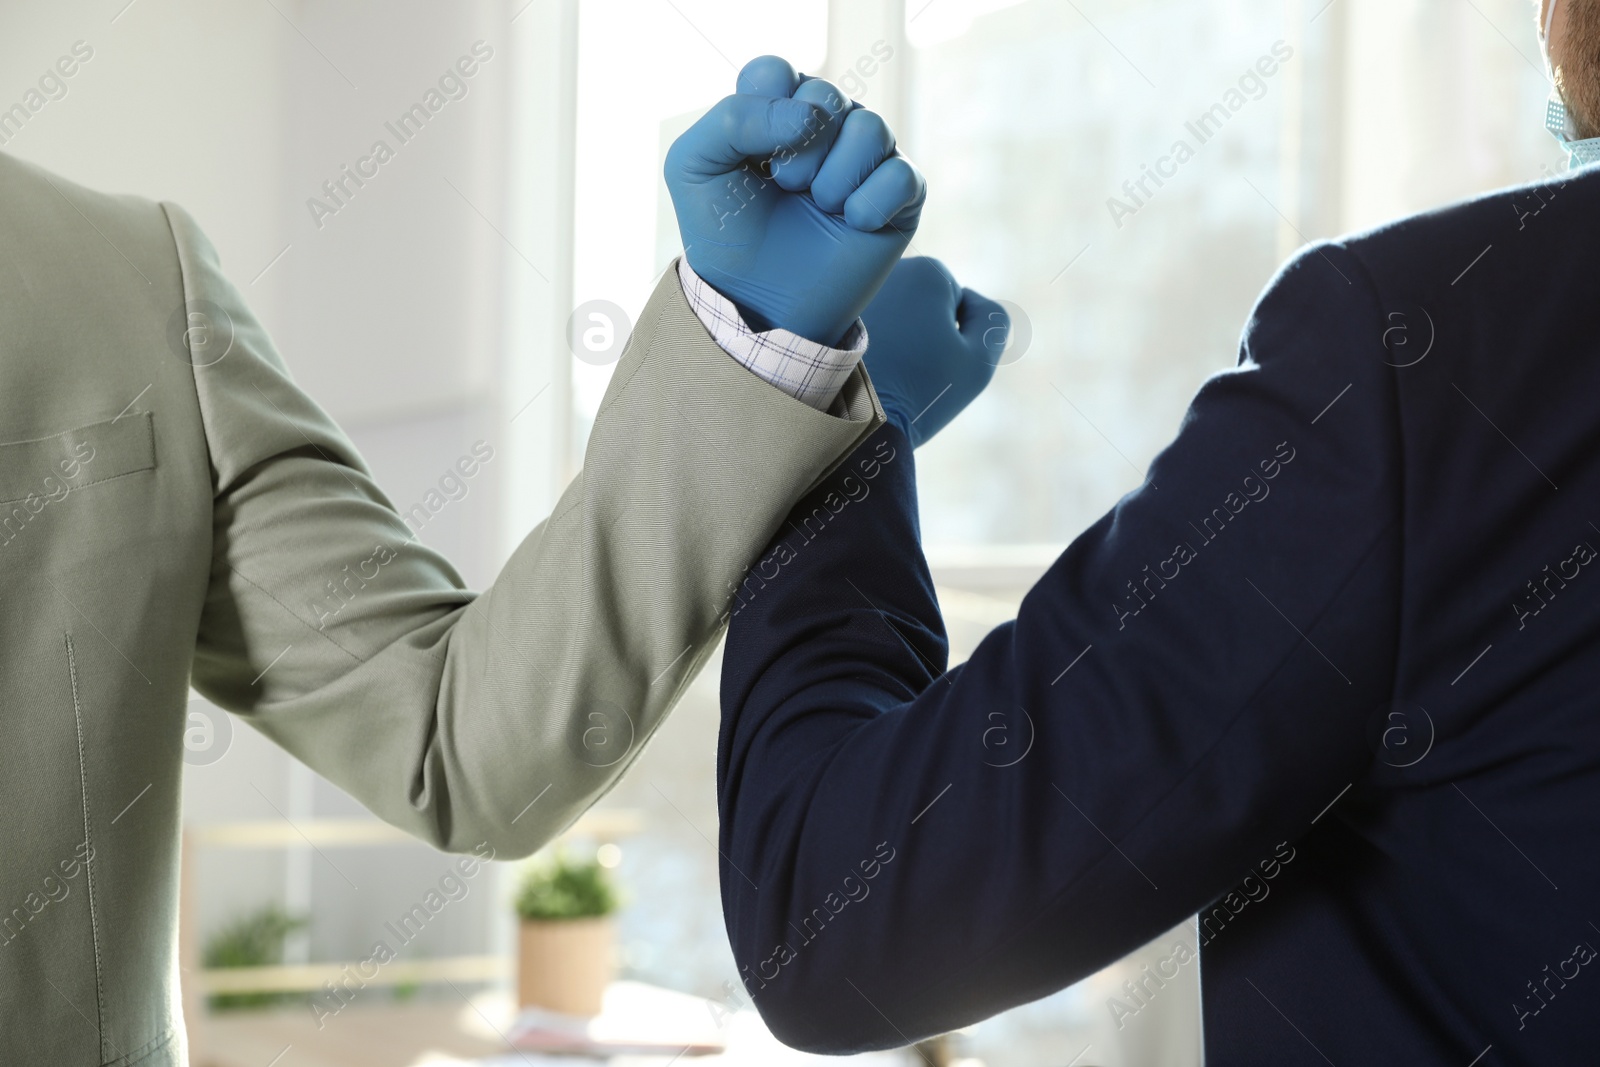 Photo of Office employees greeting each other by bumping elbows at workplace, closeup